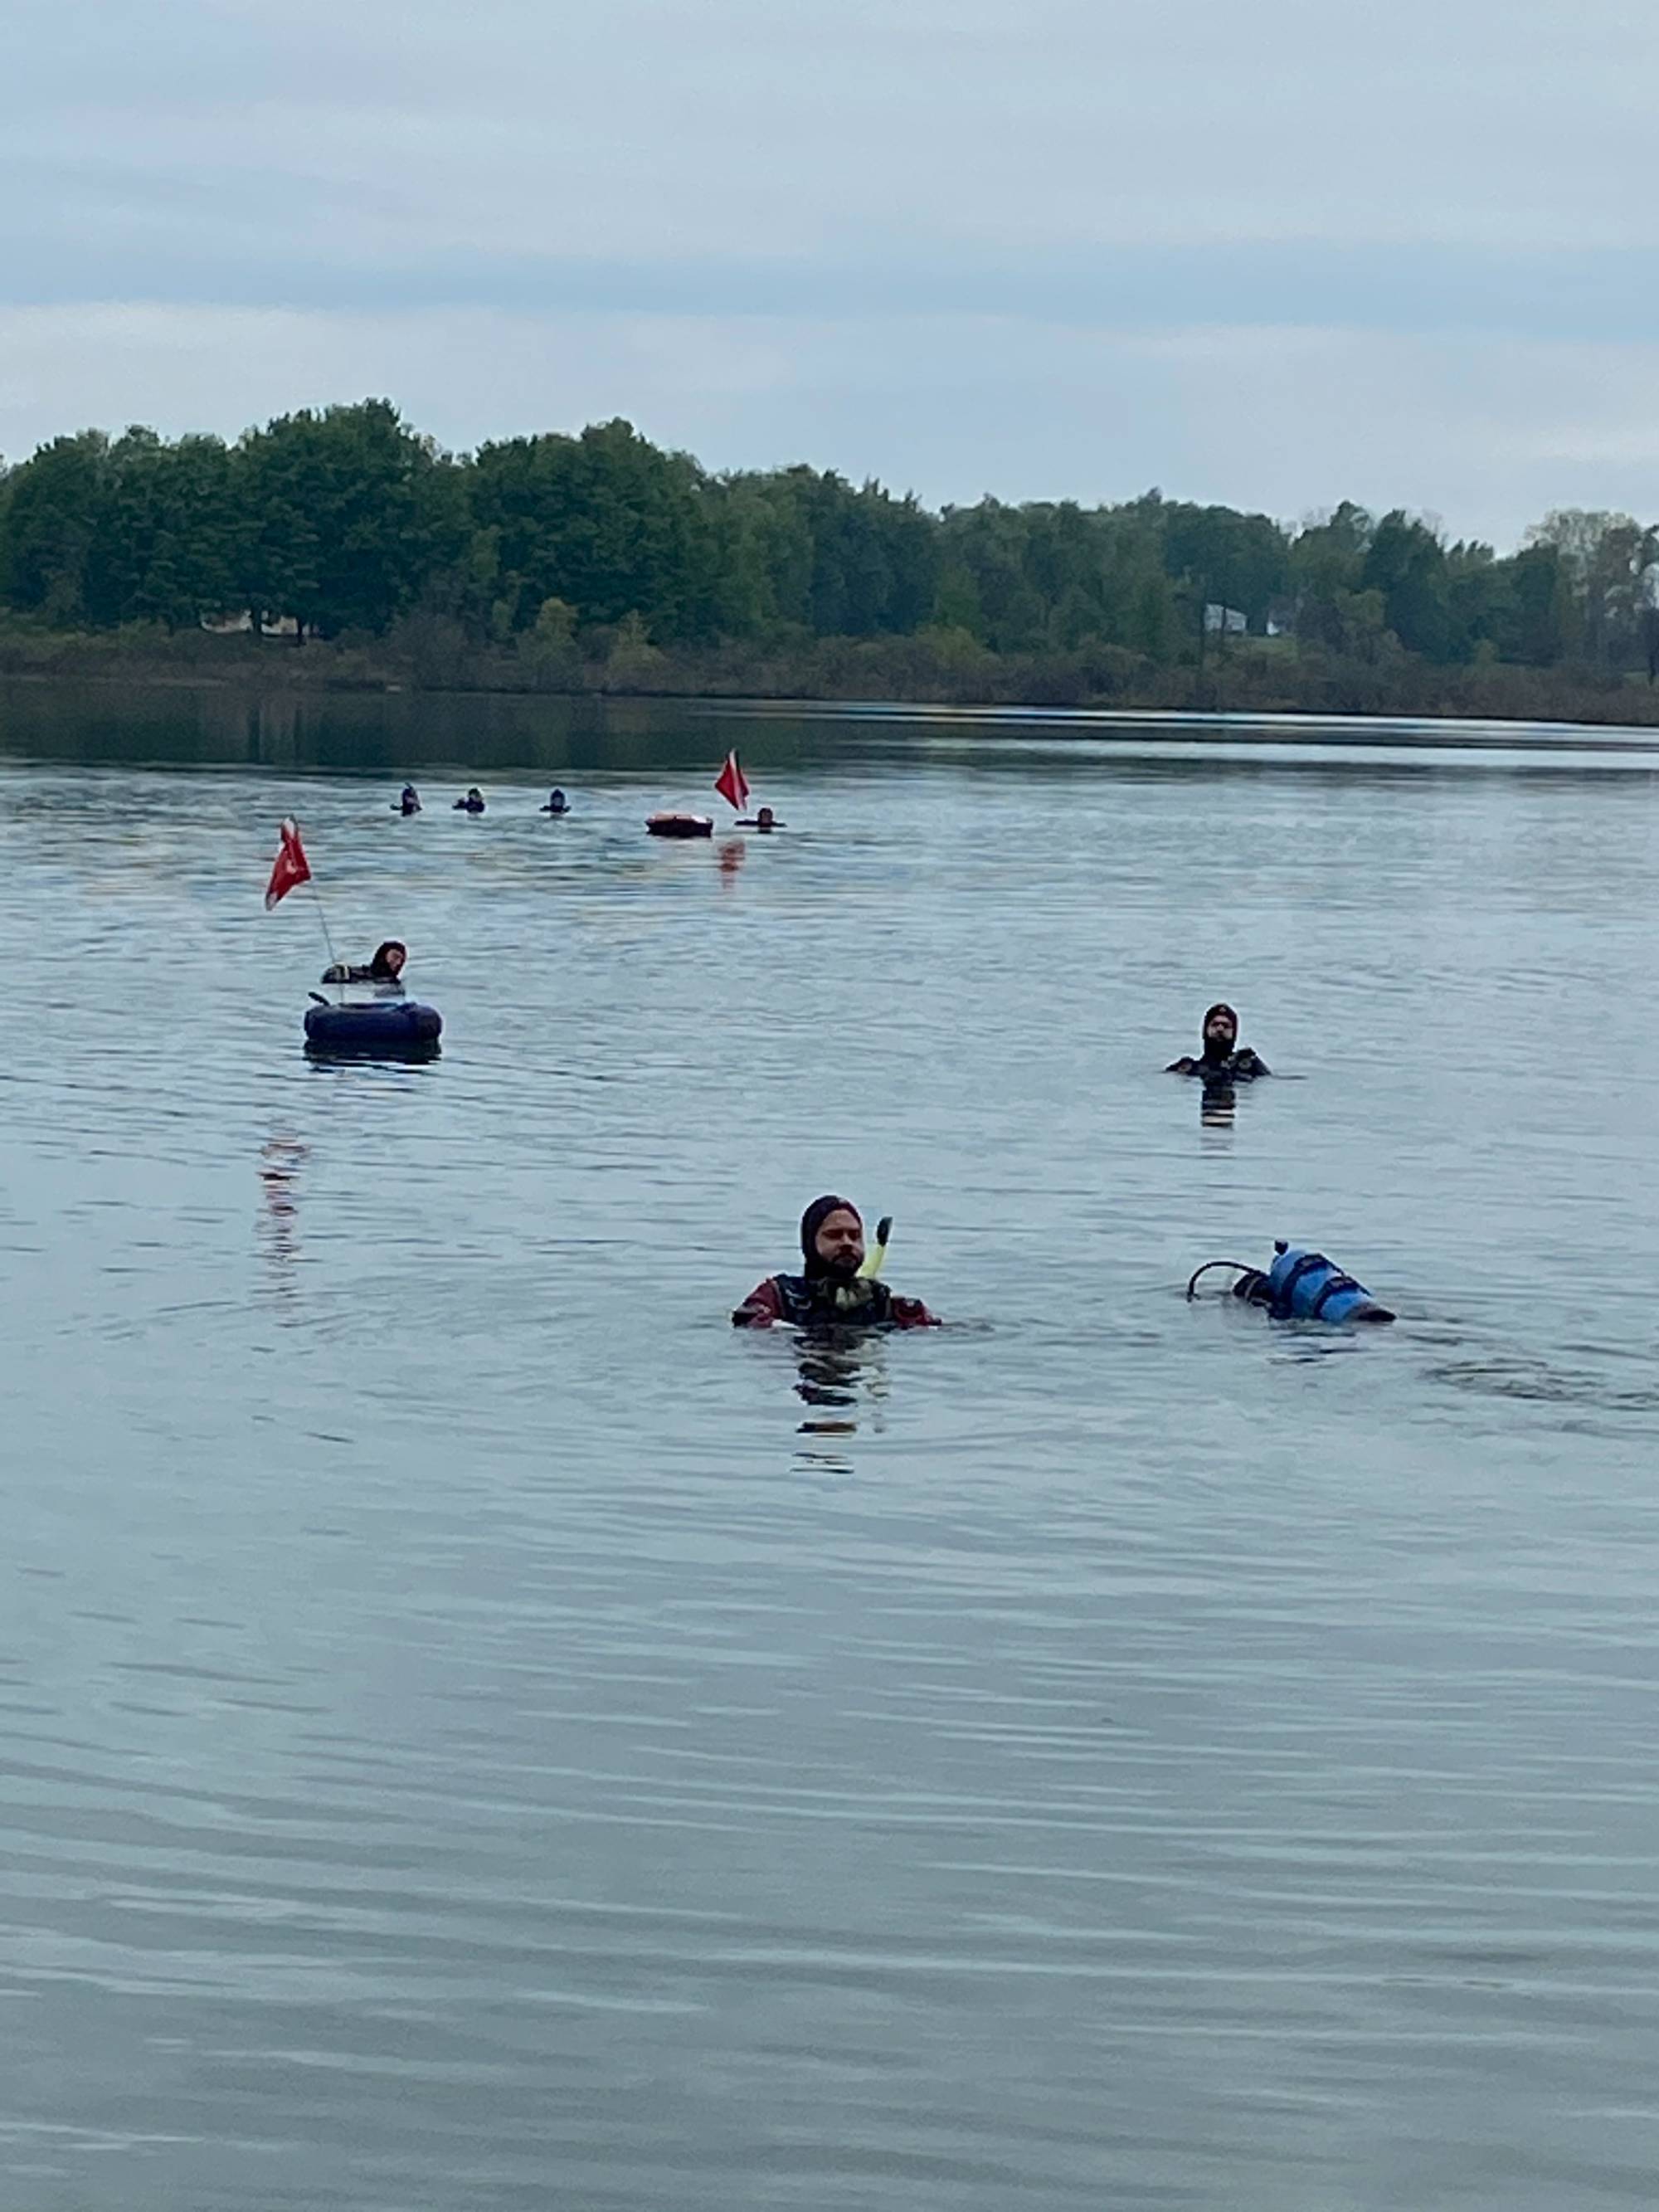 Scuba class ventures out farther into the water